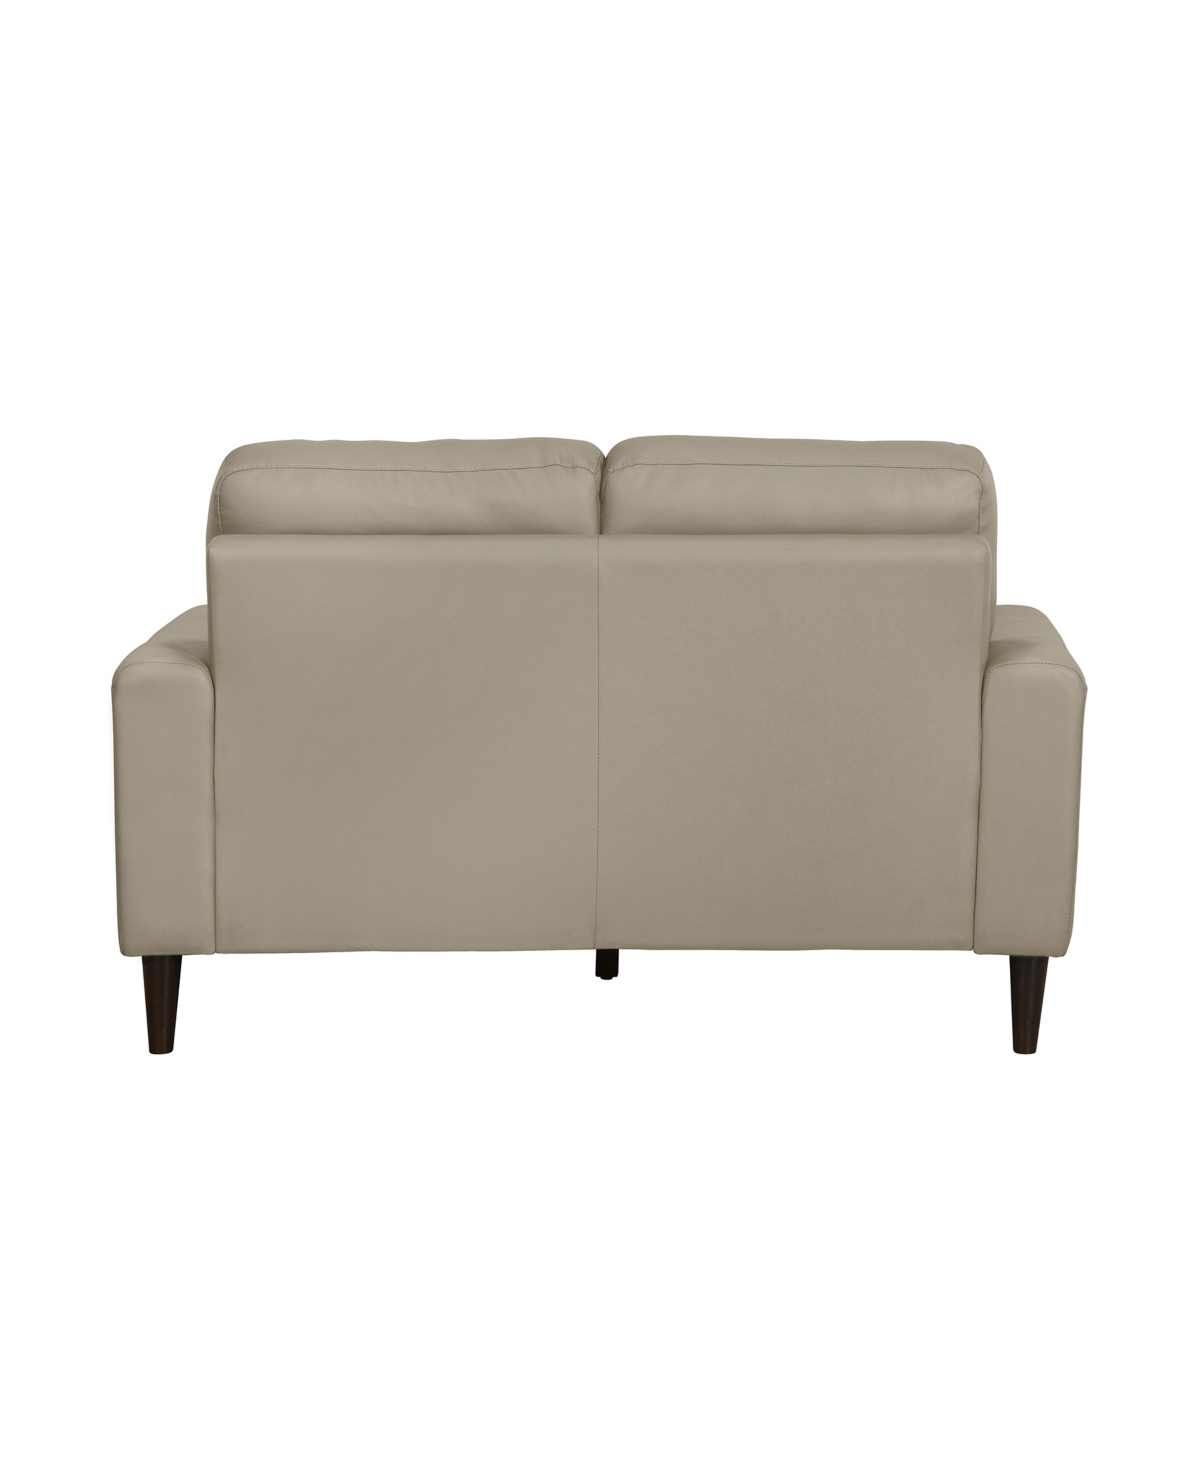 Shop Homelegance White Label Tabor 56" Leather Match Love Seat In Beige